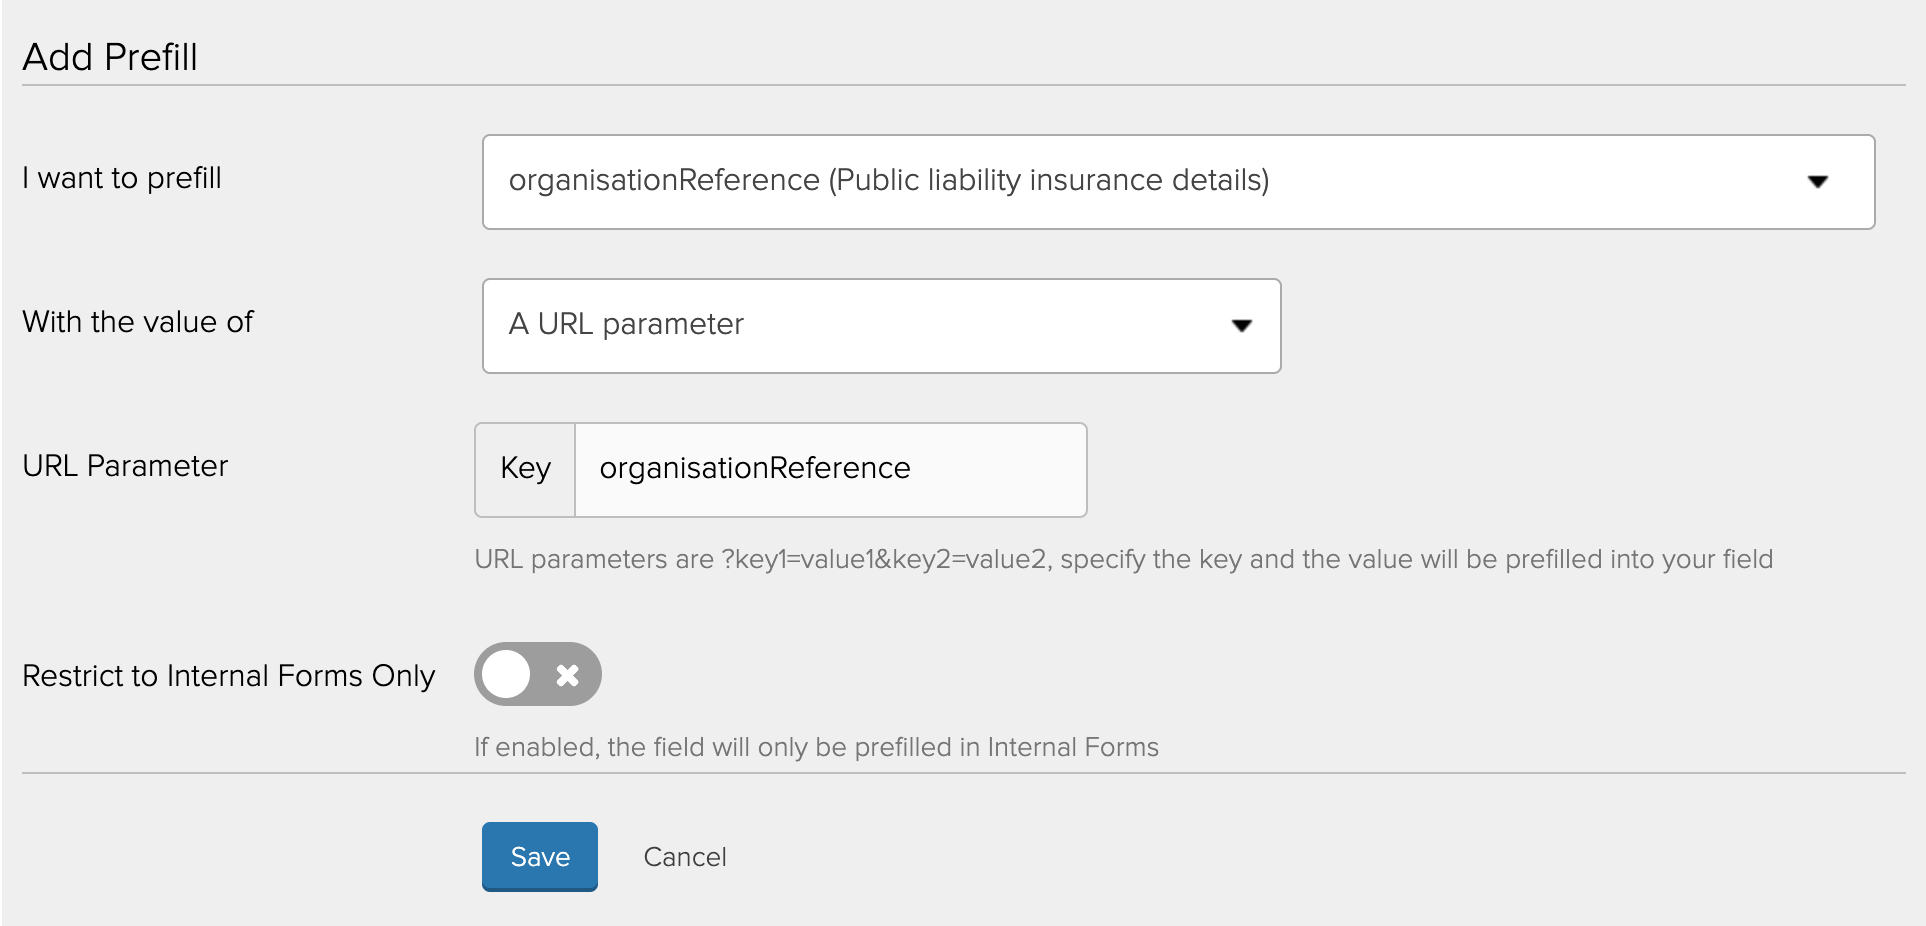 Prefill a URL parameter with the organisation reference